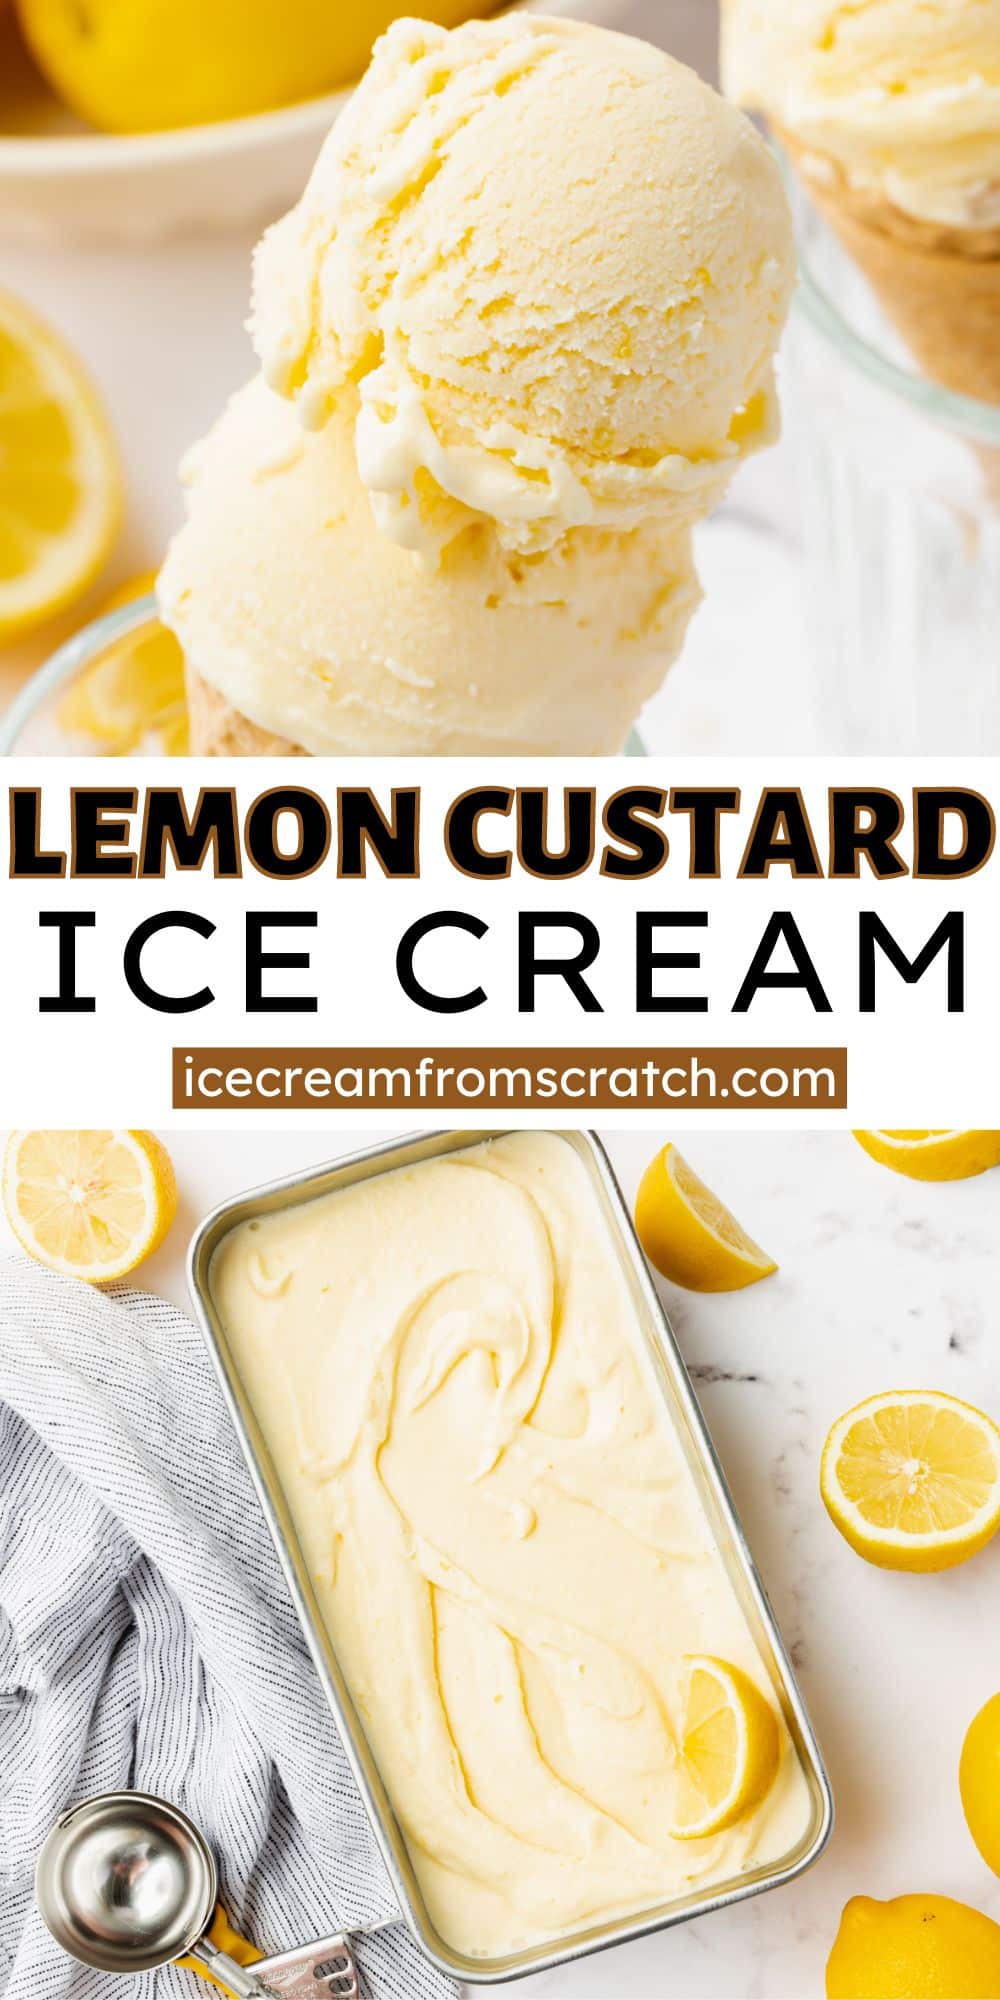 two photos of lemon custard ice cream, one in a cone, one in a pan. Text in center of image says "lemon custard ice cream, icecreamfromscratch.com"